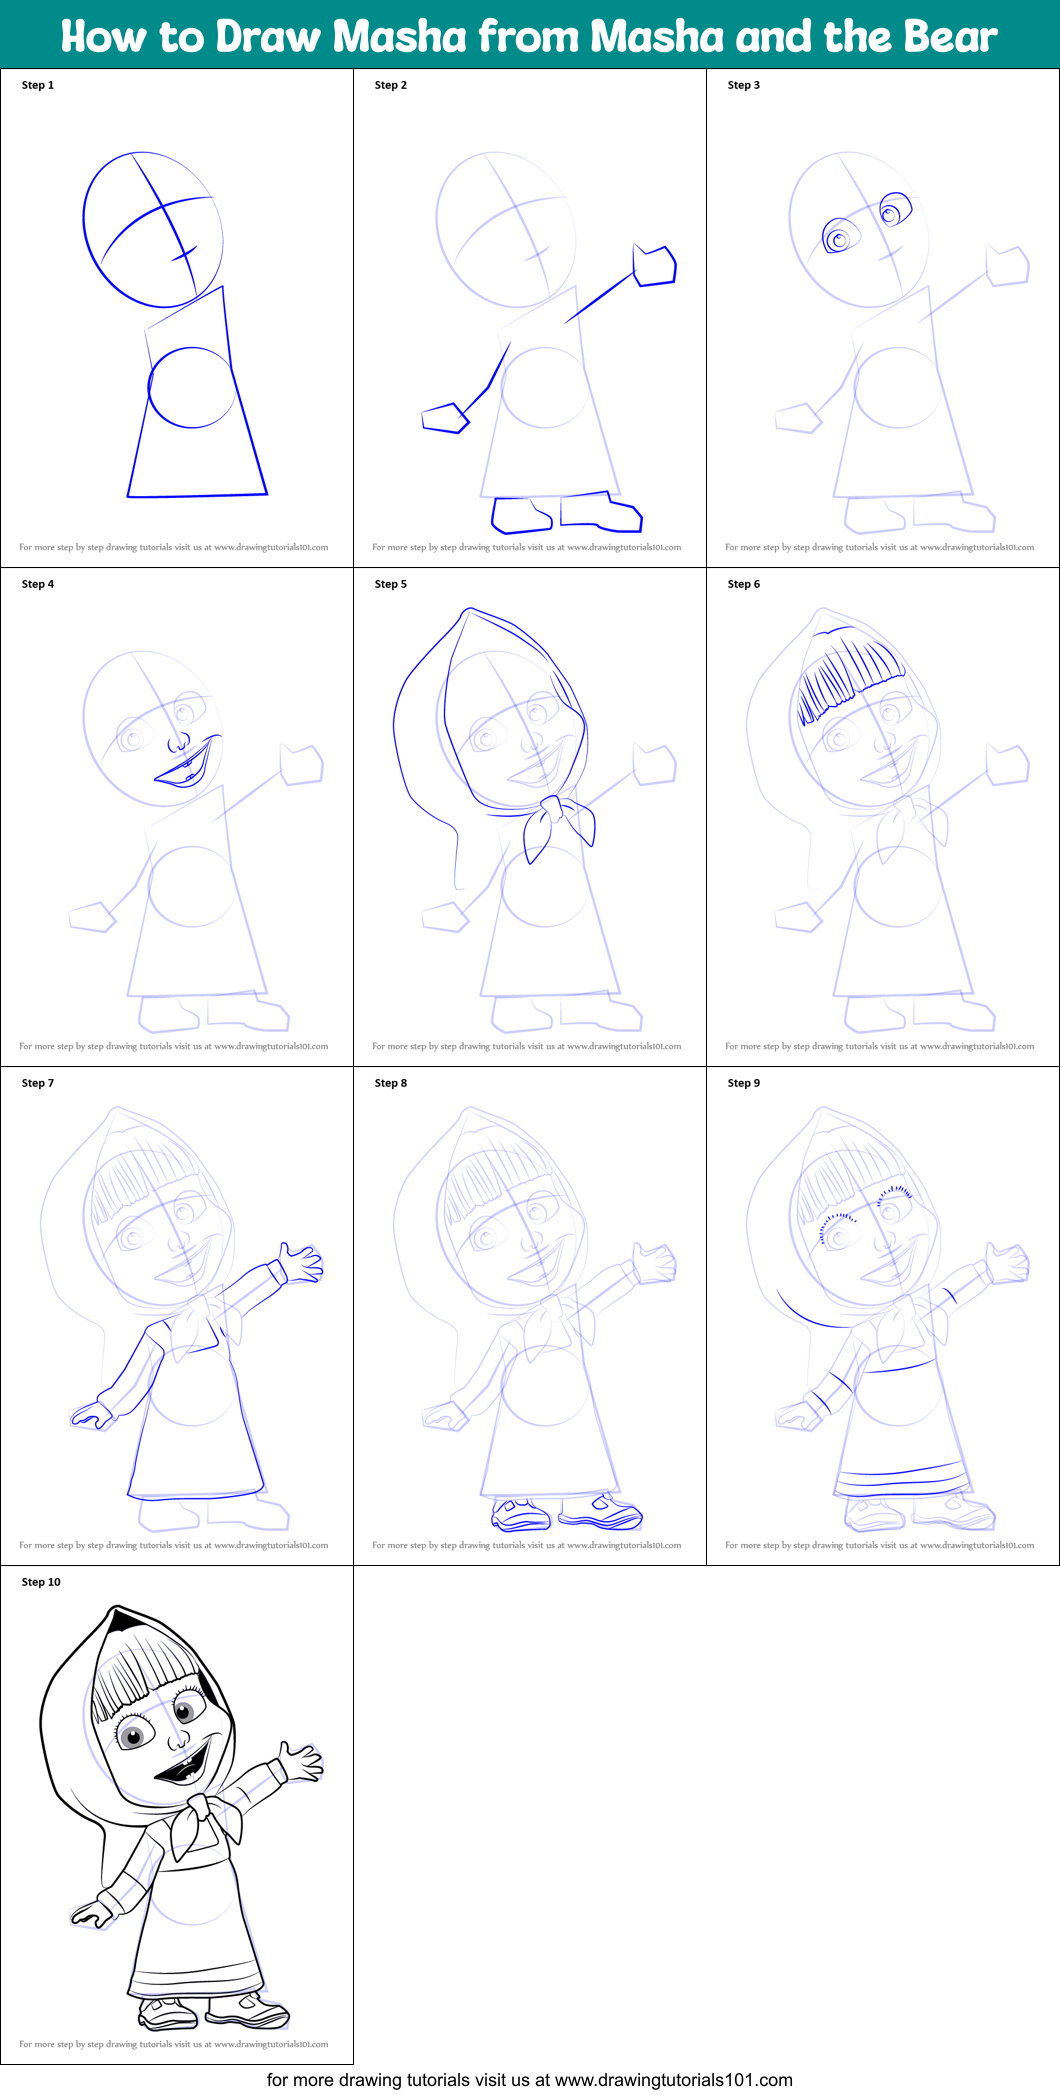 How to Draw Masha from Masha and the Bear printable step by step